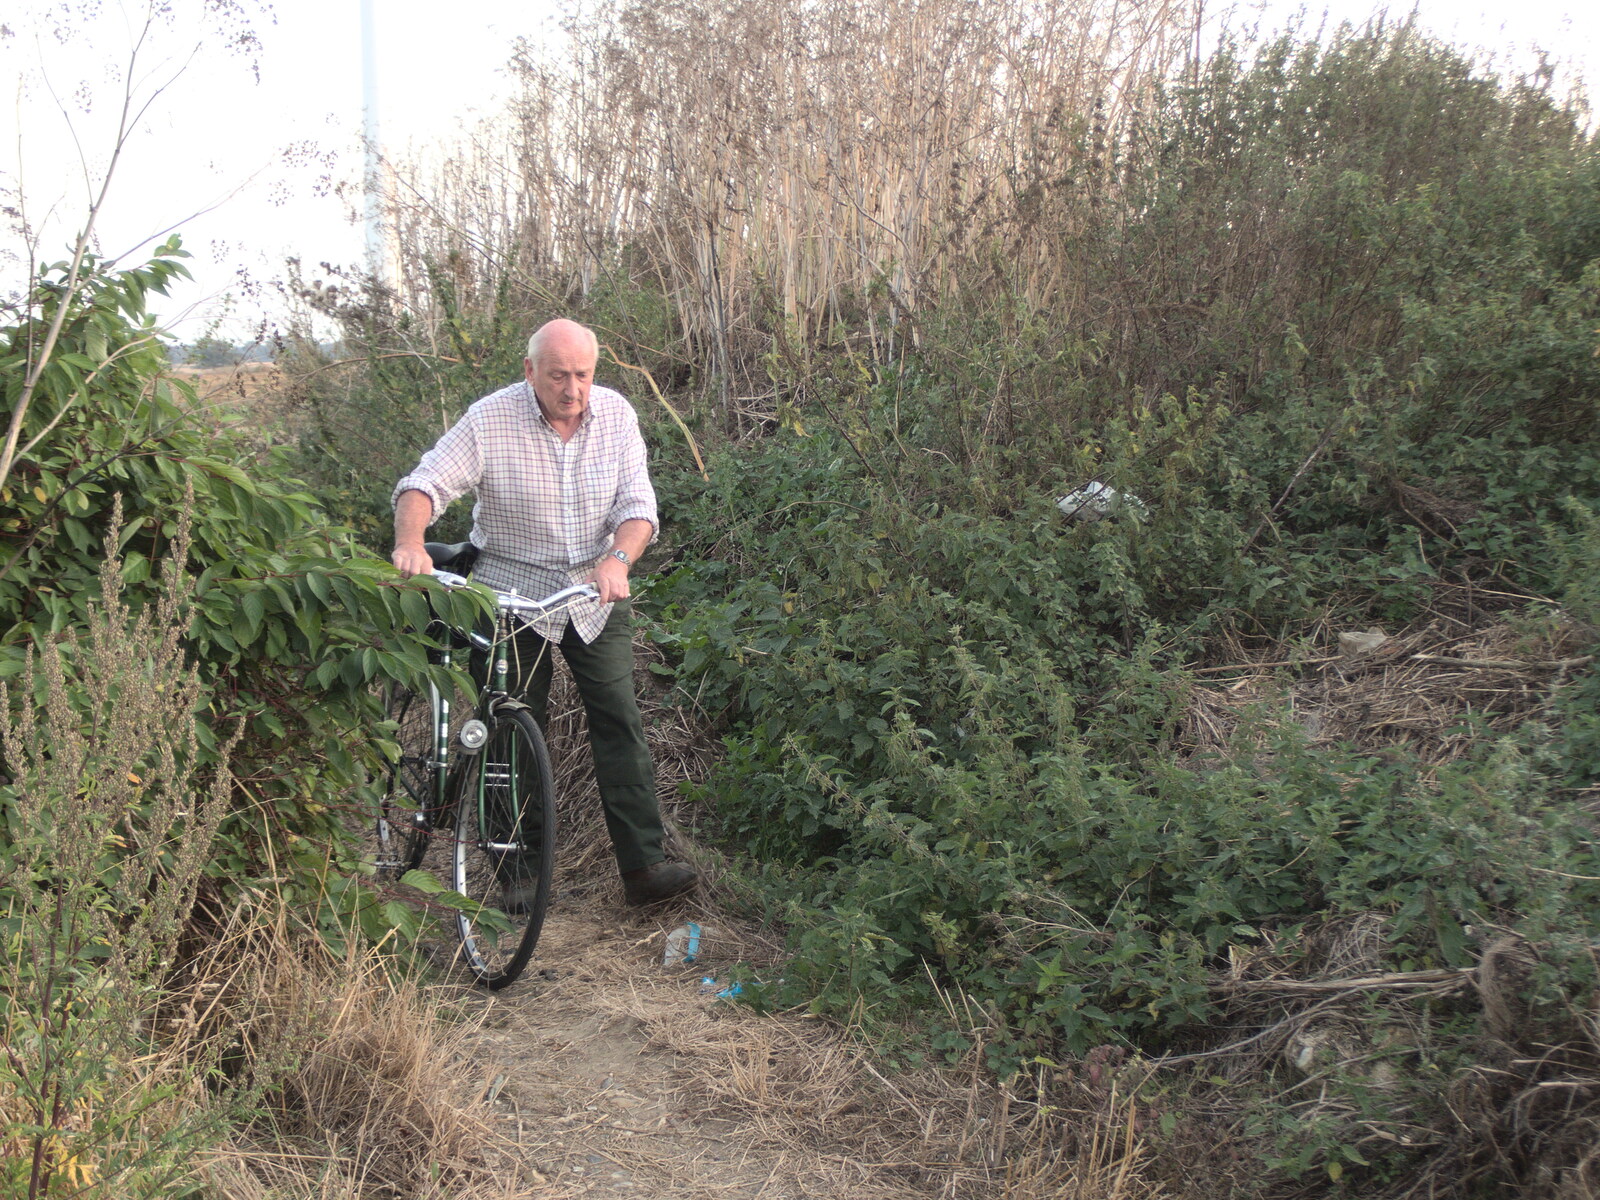 The Last Weavers Ever, Market Hill, Diss, Norfolk - 10th September 2021: Mick hauls his bike through the undergrowth